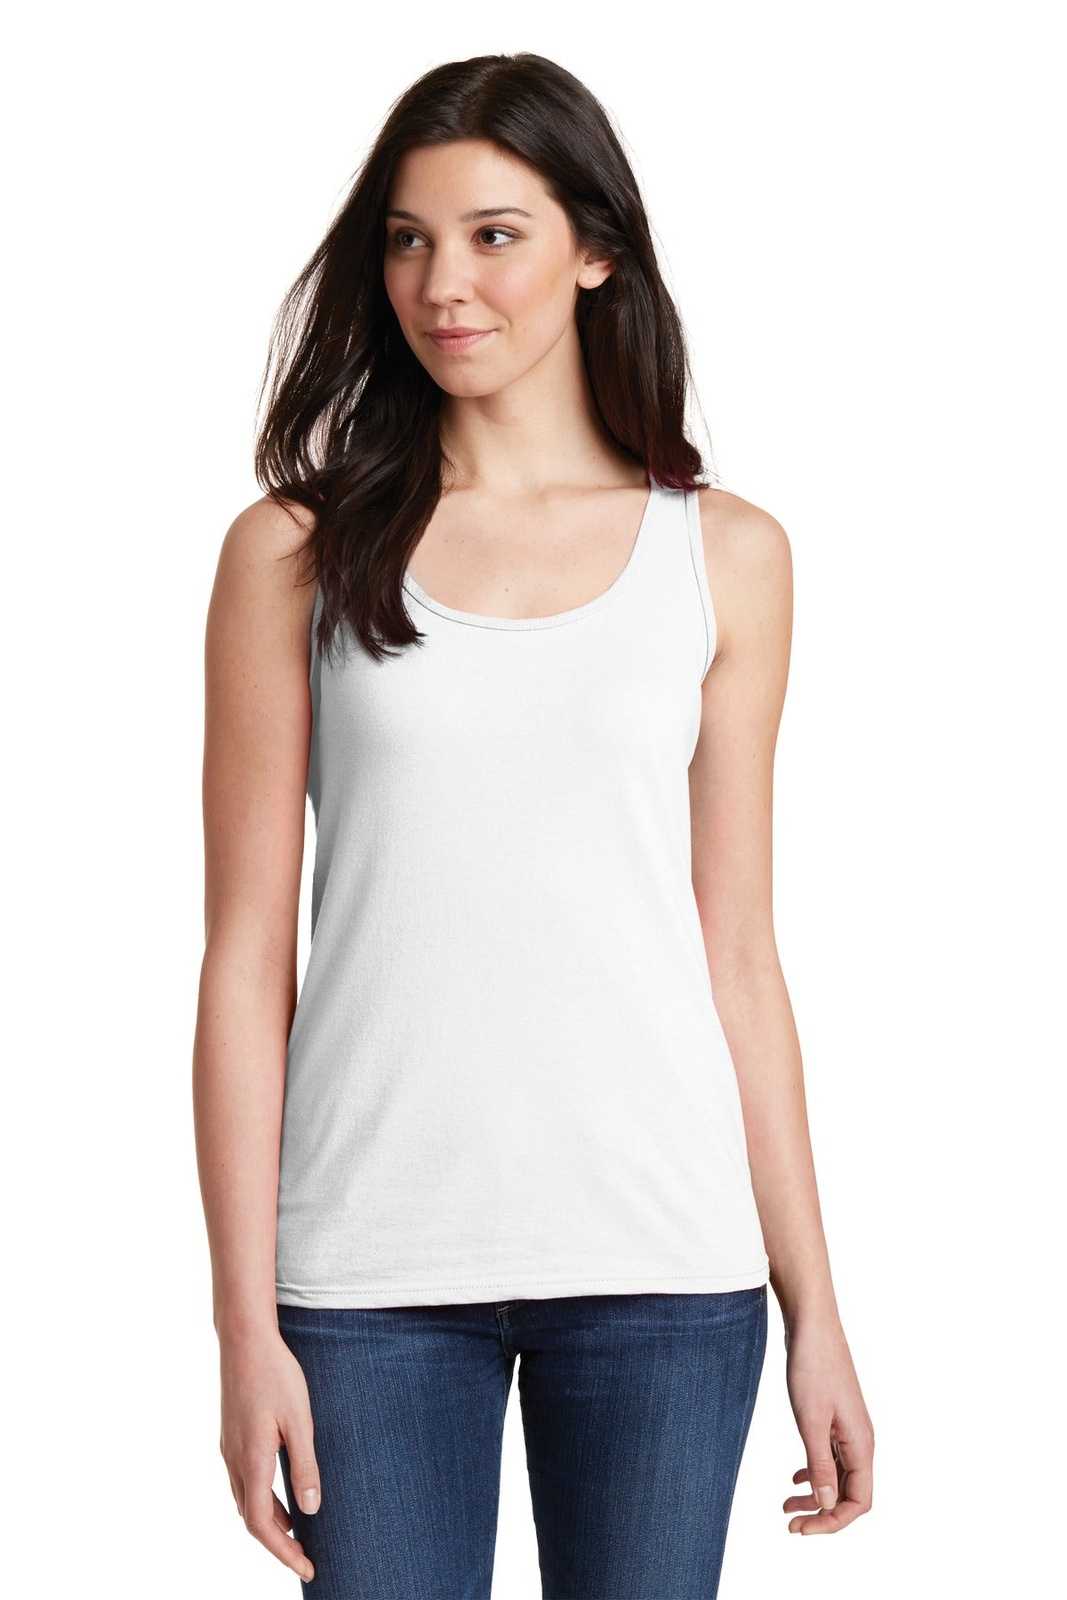 Gildan 64200L Softstyle Junior Fit Tank Top - White - HIT a Double